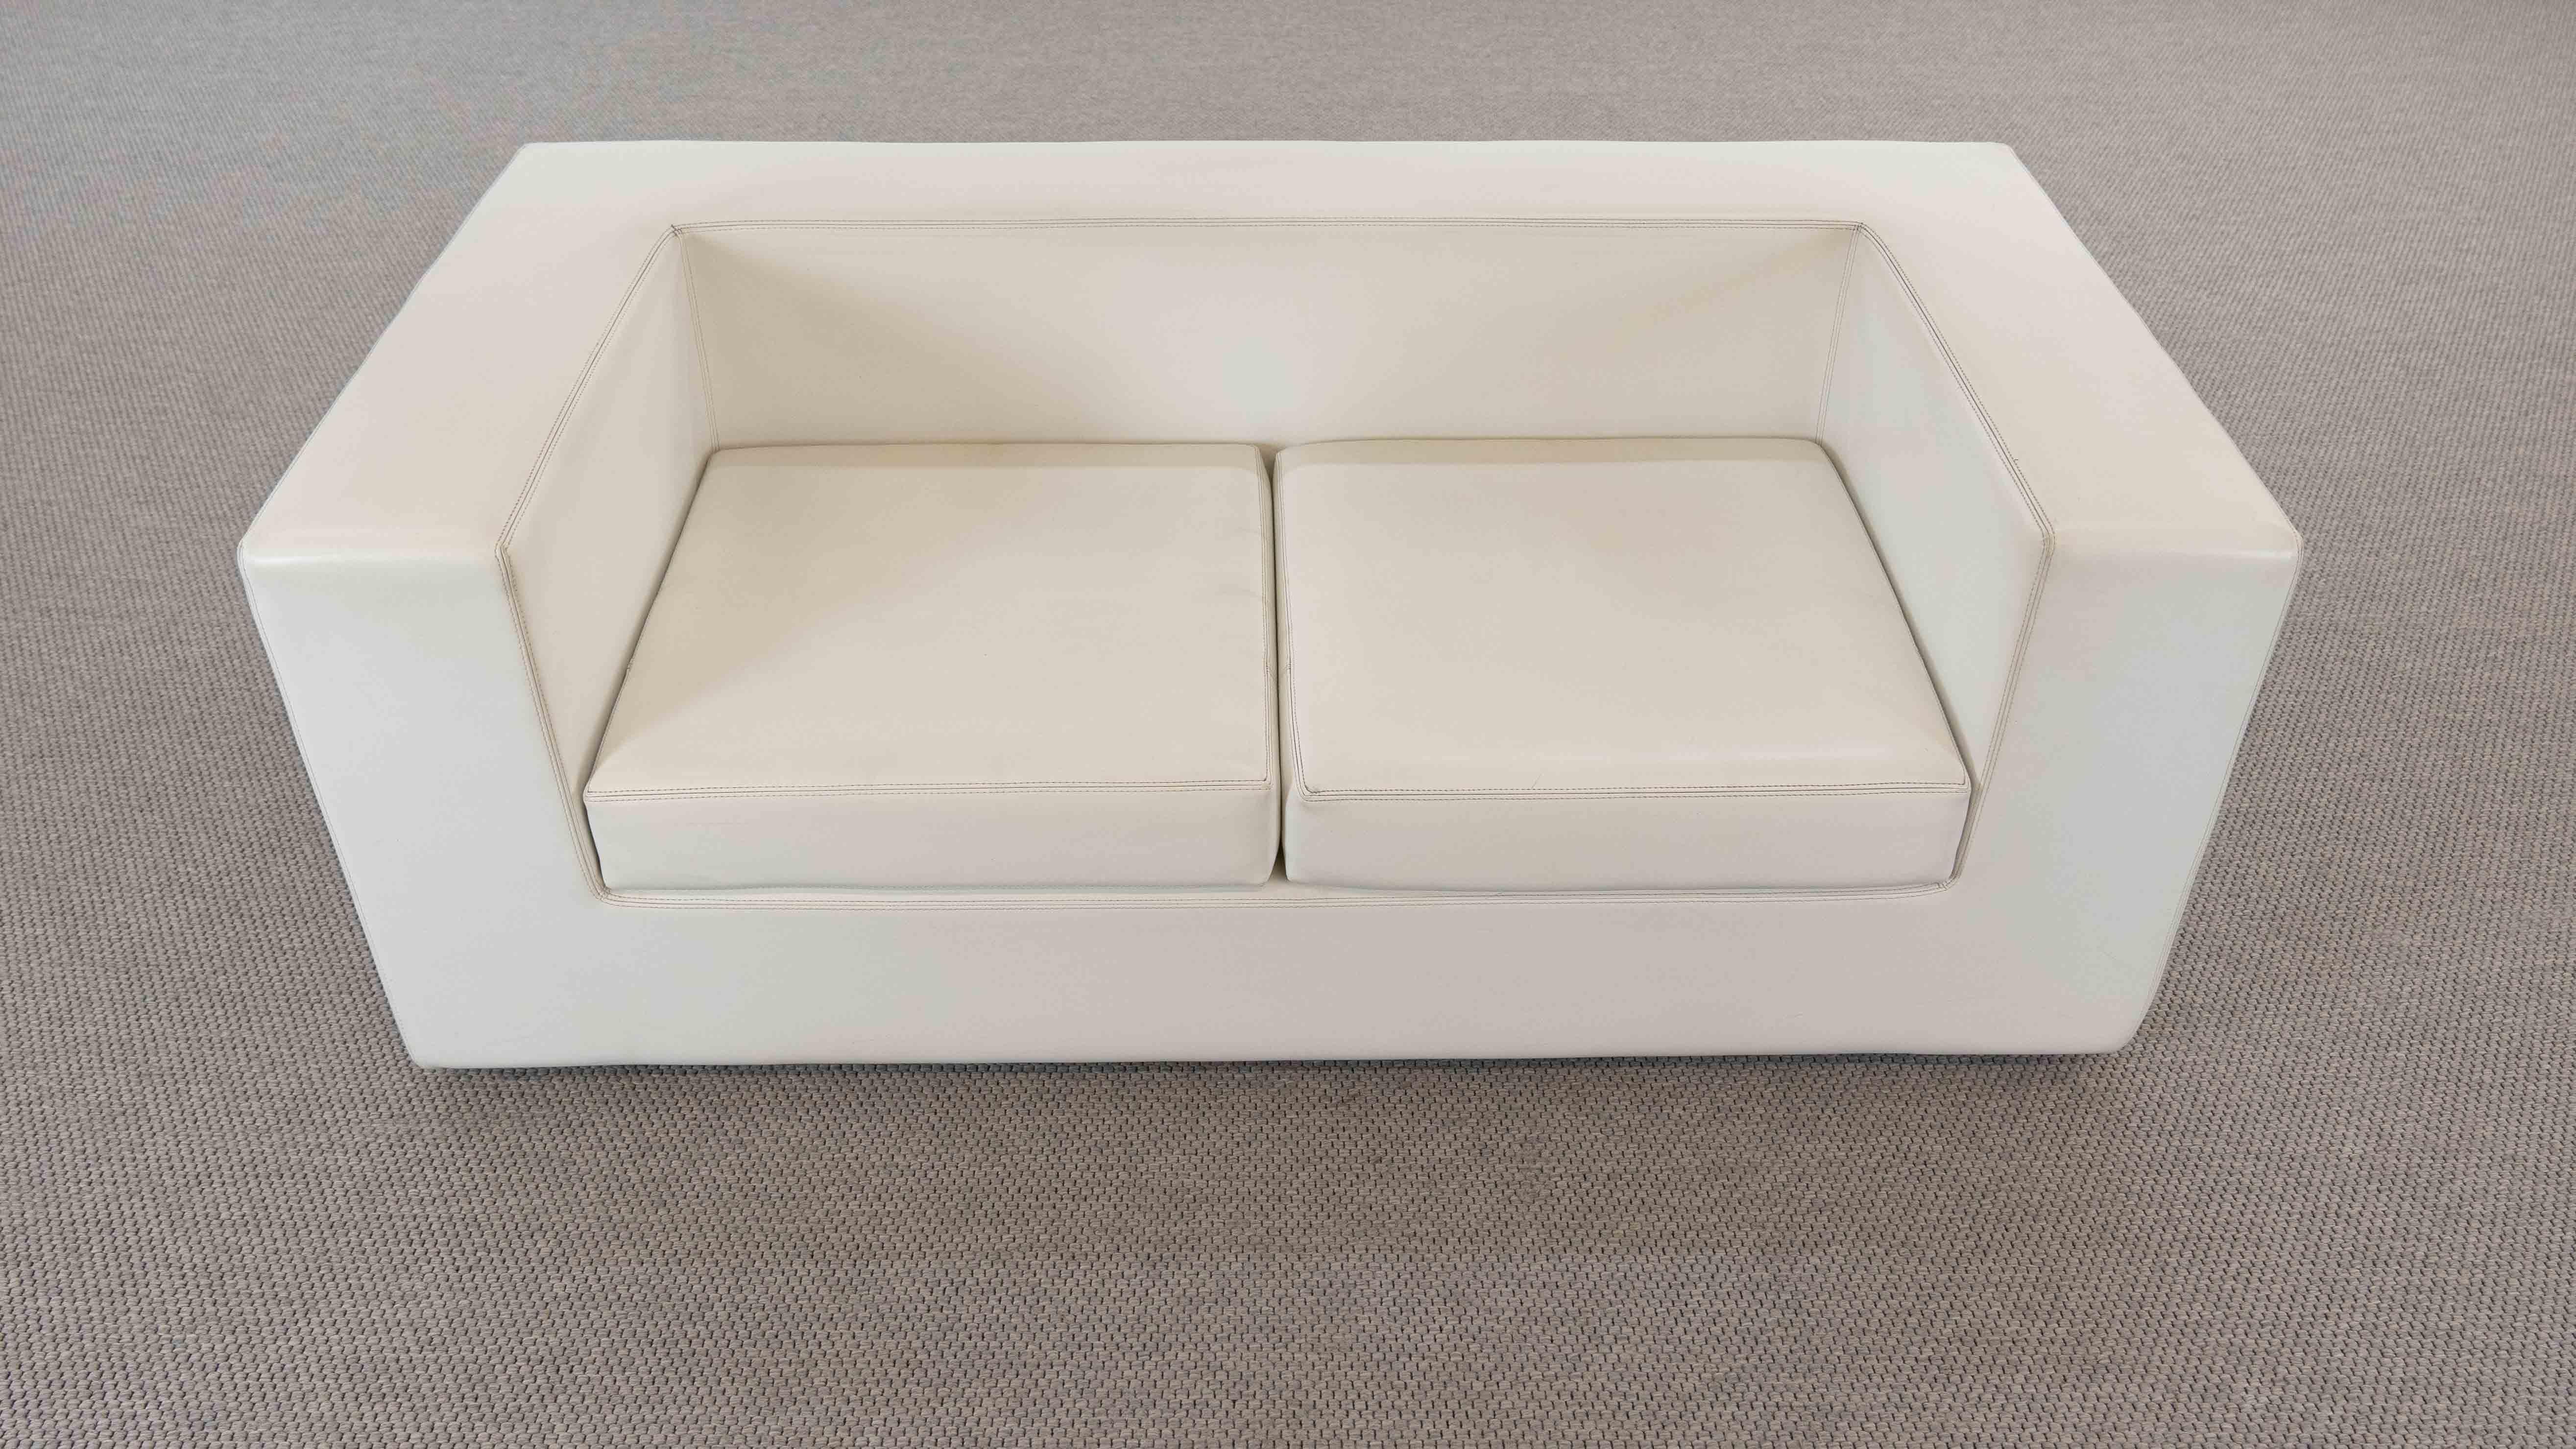 Space Age Throw Away Sofa by Willie Landels for Zanotta 1965 in White Vinyl For Sale